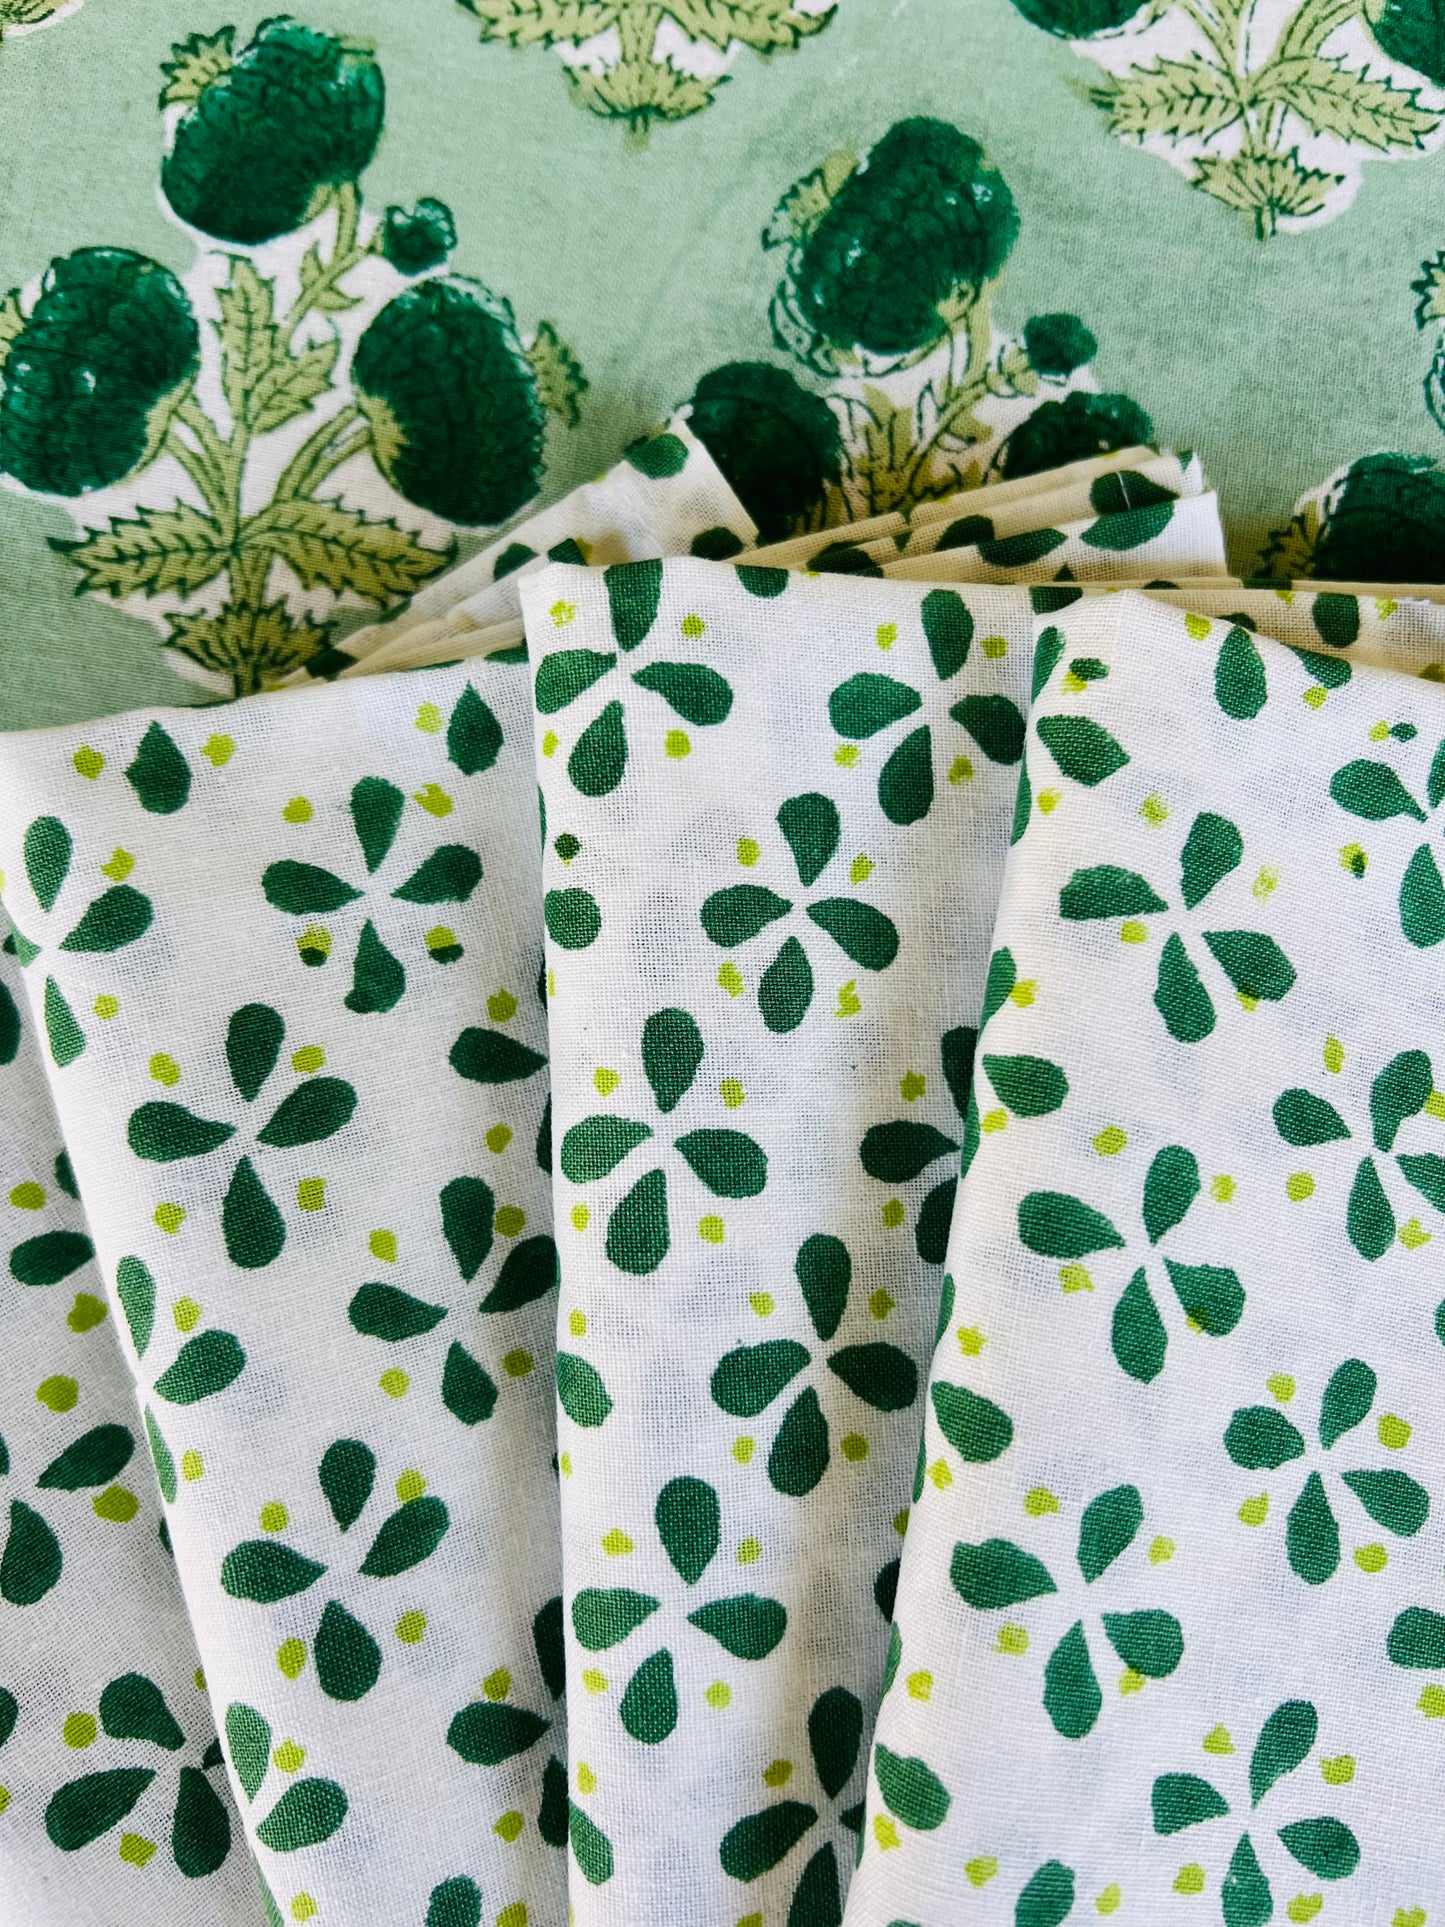 Poms Tablecloth in Emerald Green